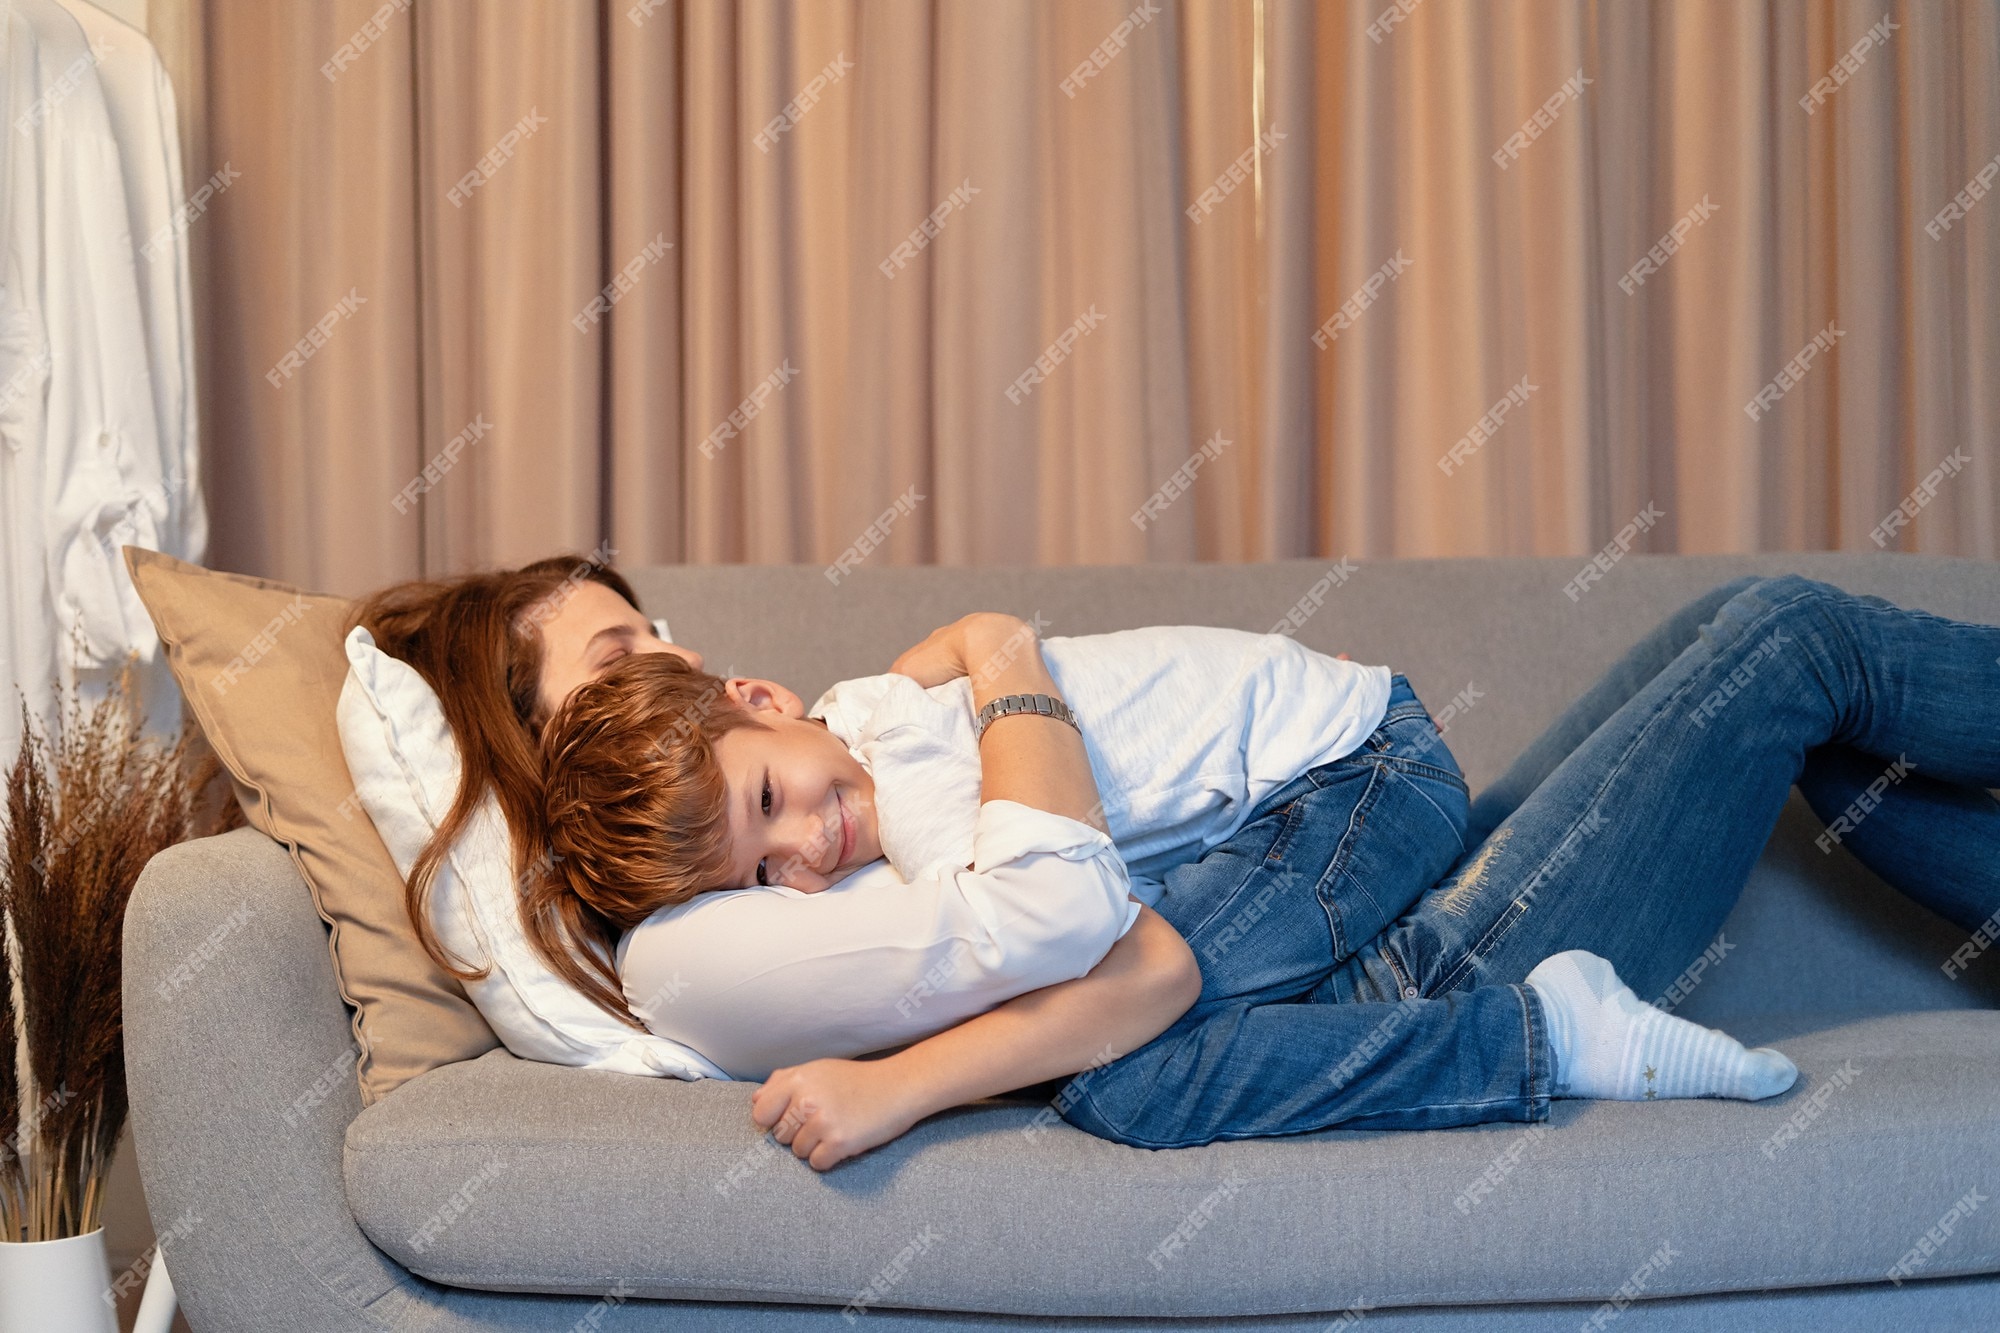 alice gaynor recommends mom and son on couch pic